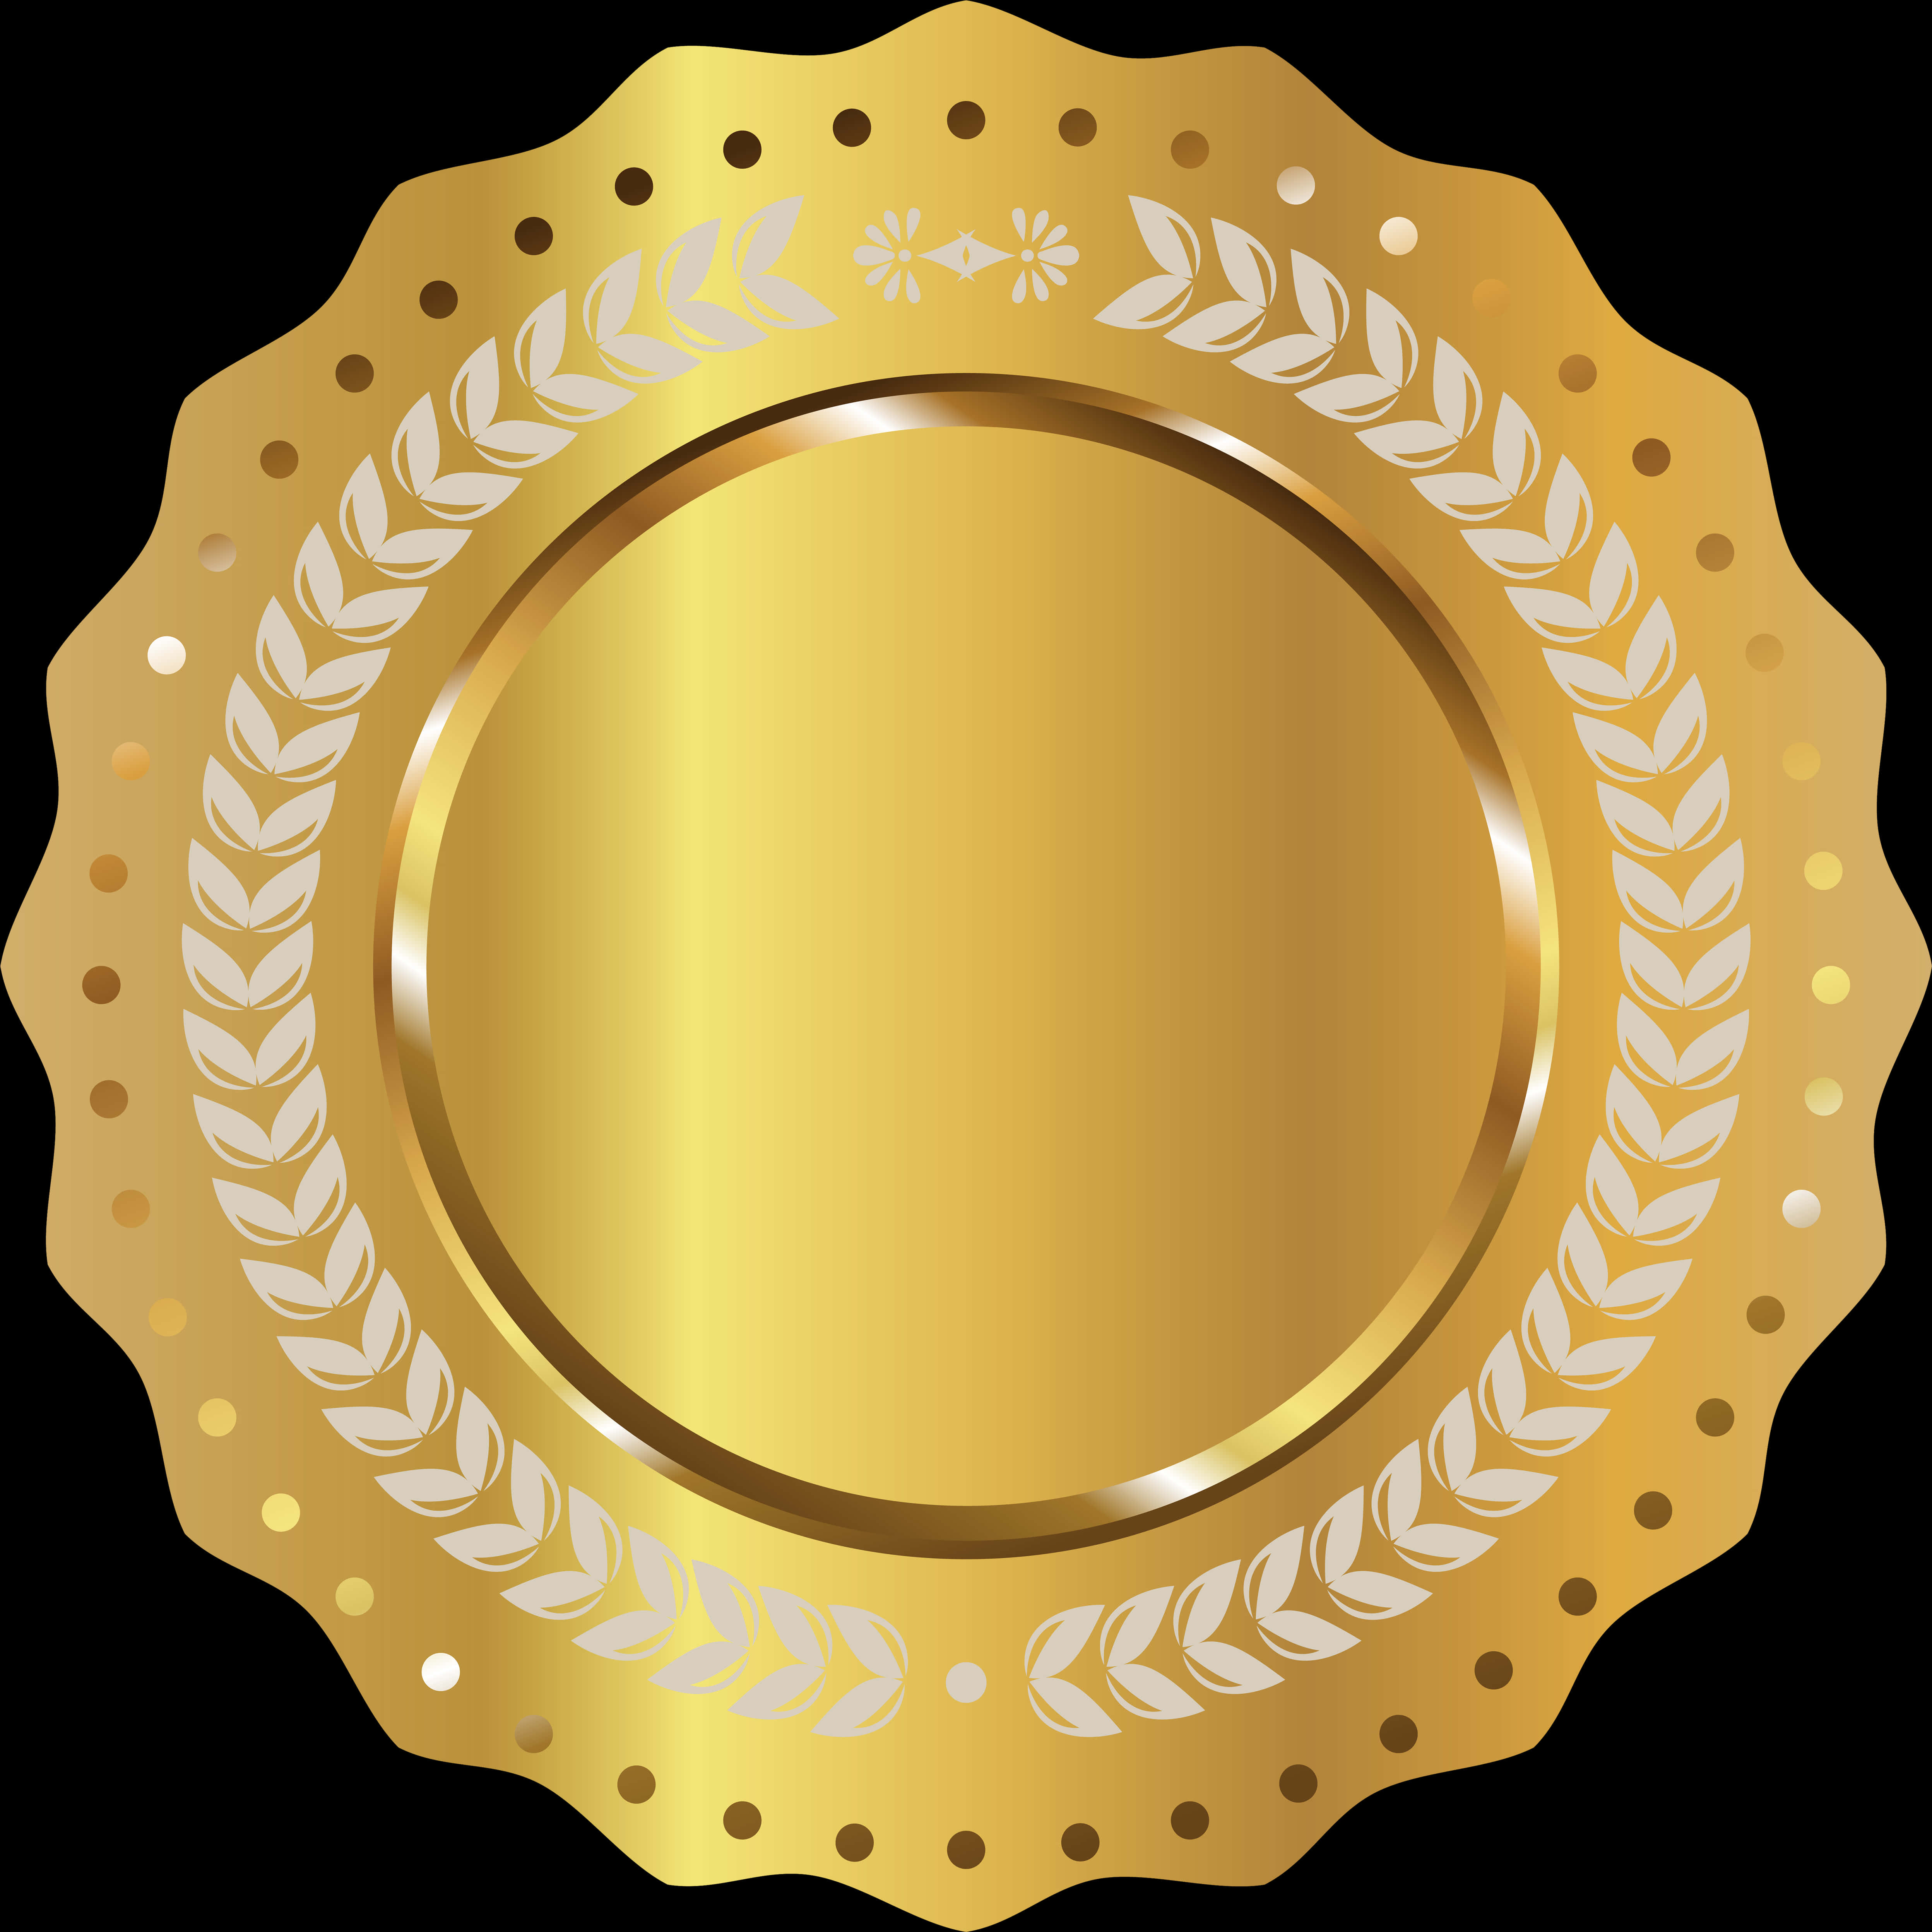 A Gold Circle With White Leaves And Dots